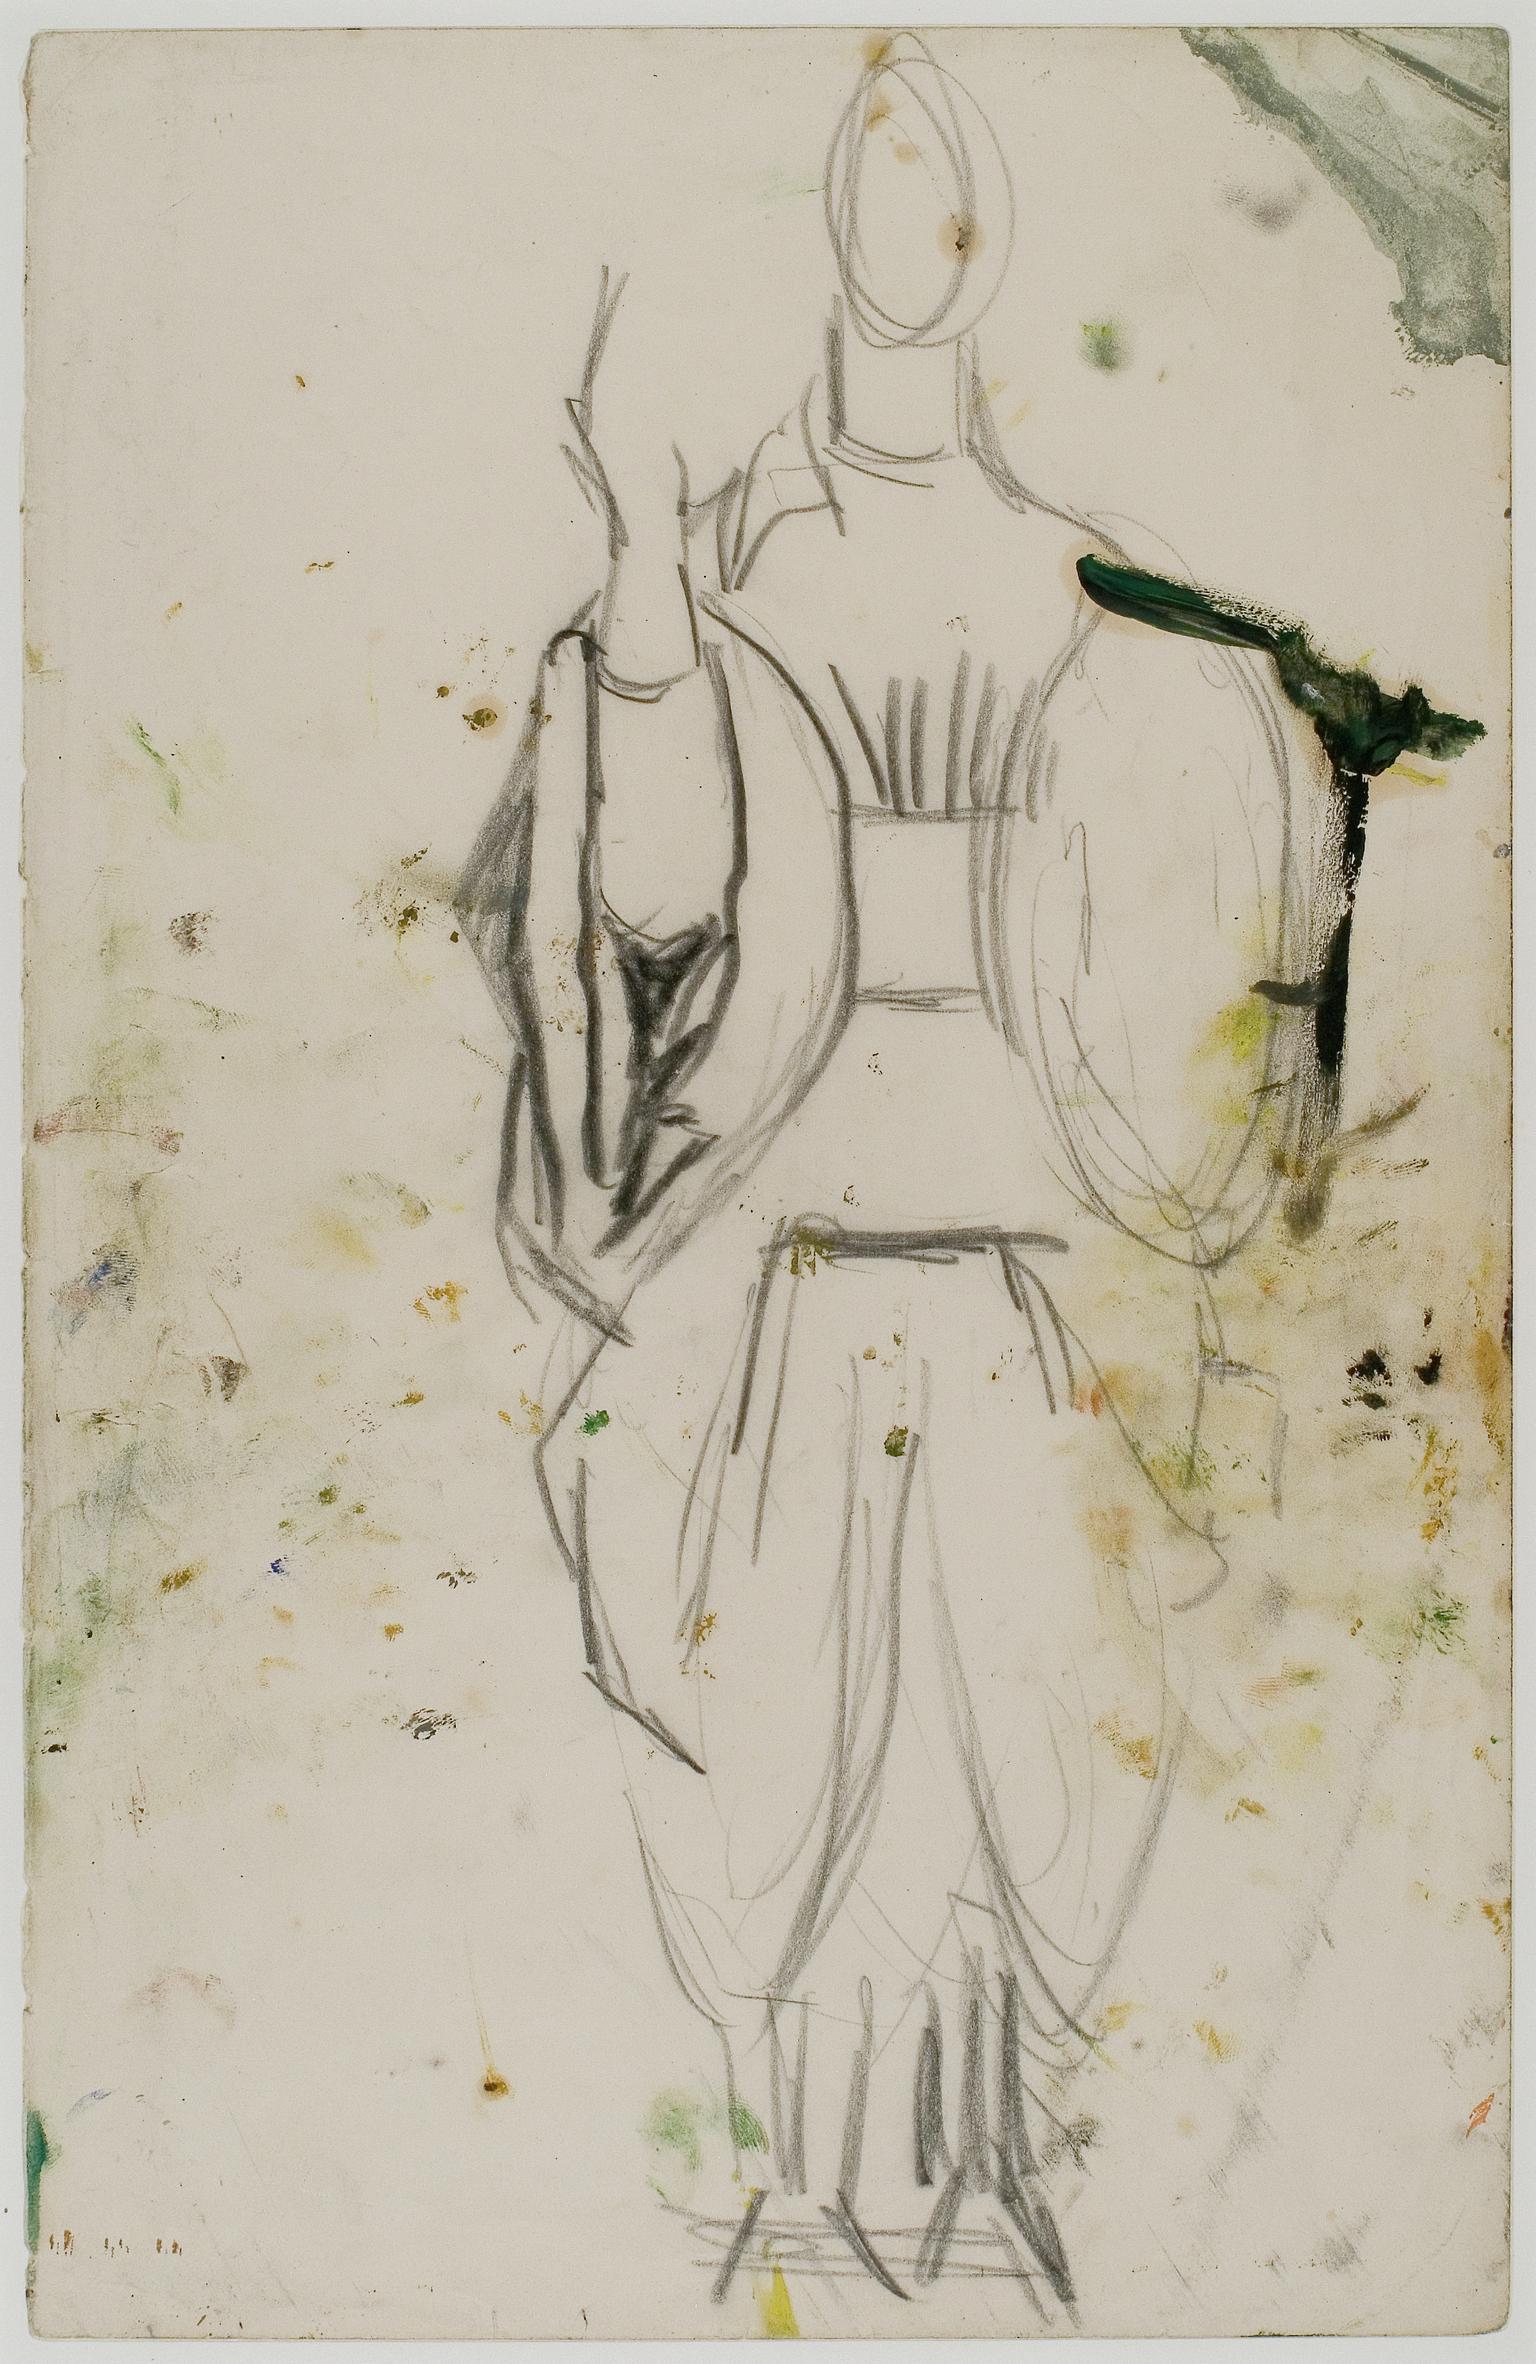 Study for central figure